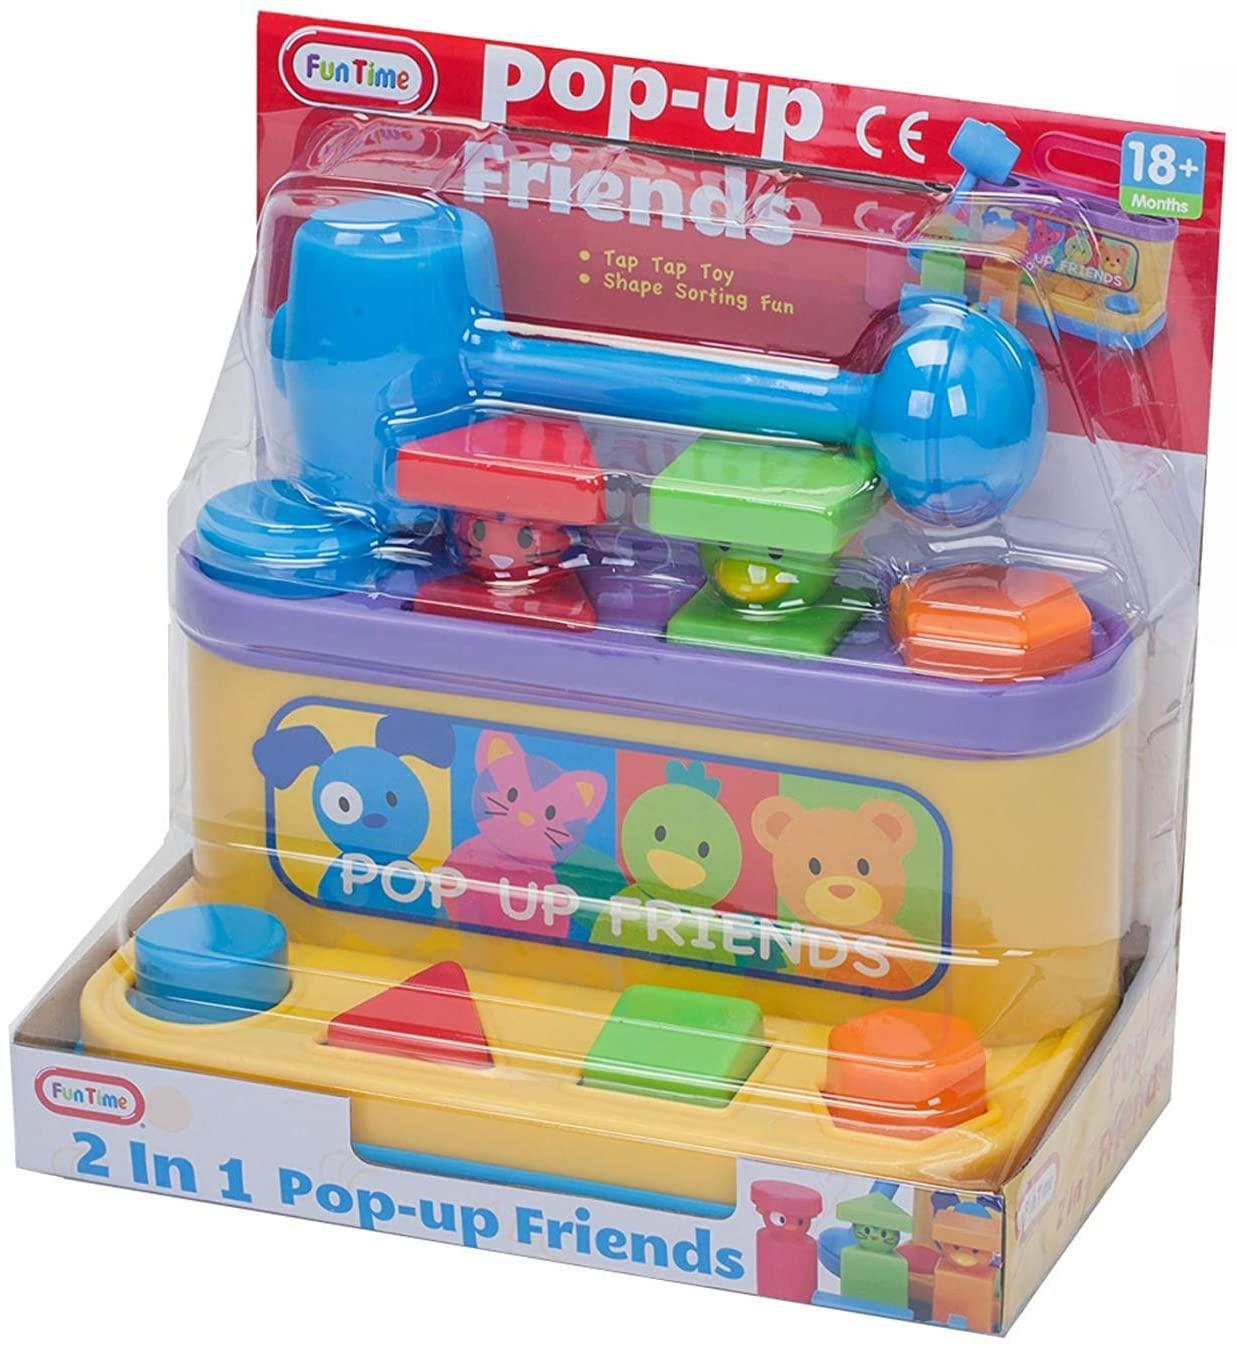 Multi-coloured Pop Up Friends with Hammer by The Magic Toy Shop - The Magic Toy Shop